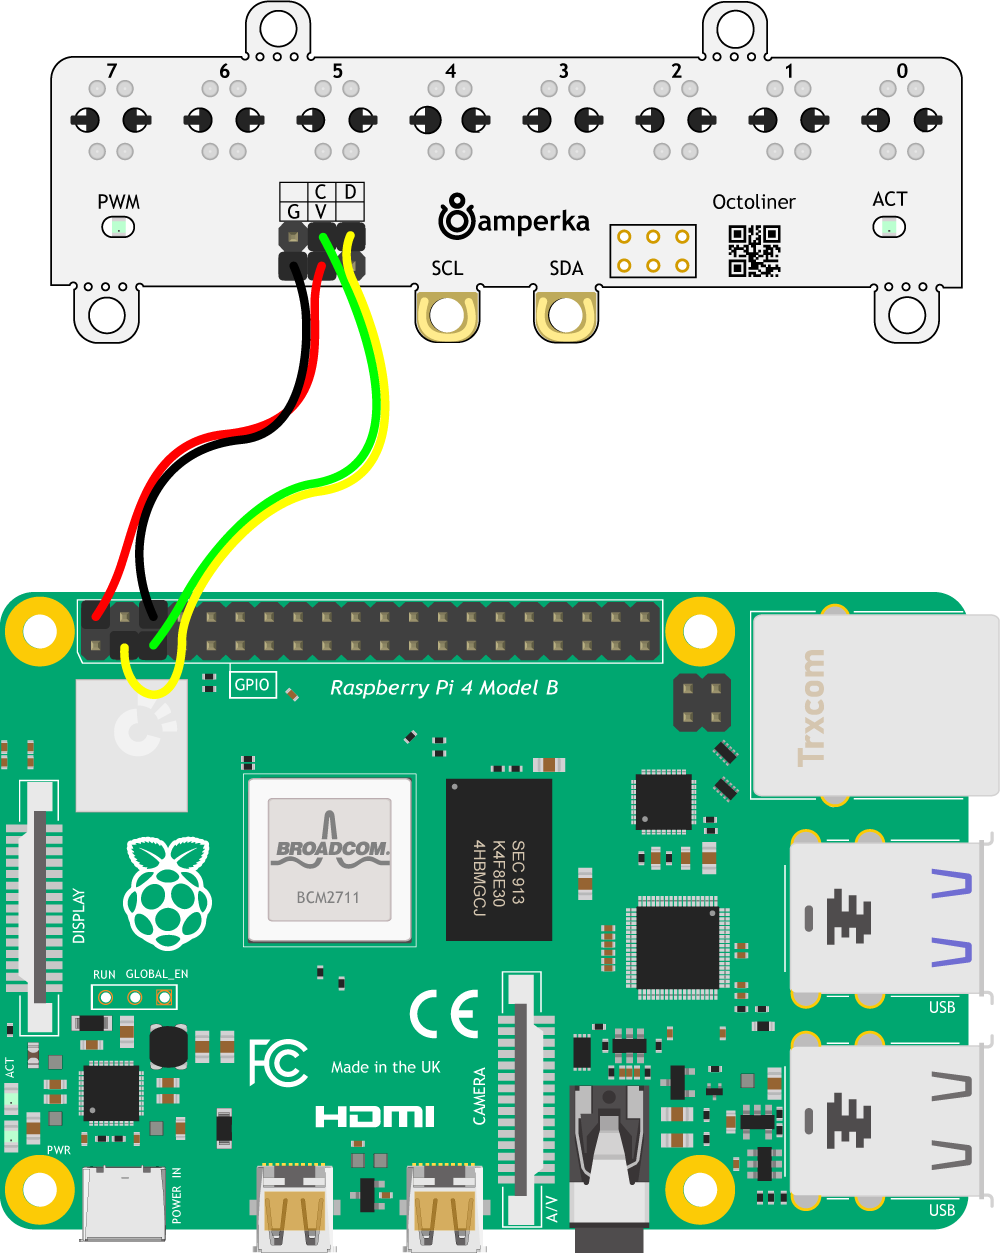 Octoliner connected to Raspberry Pi